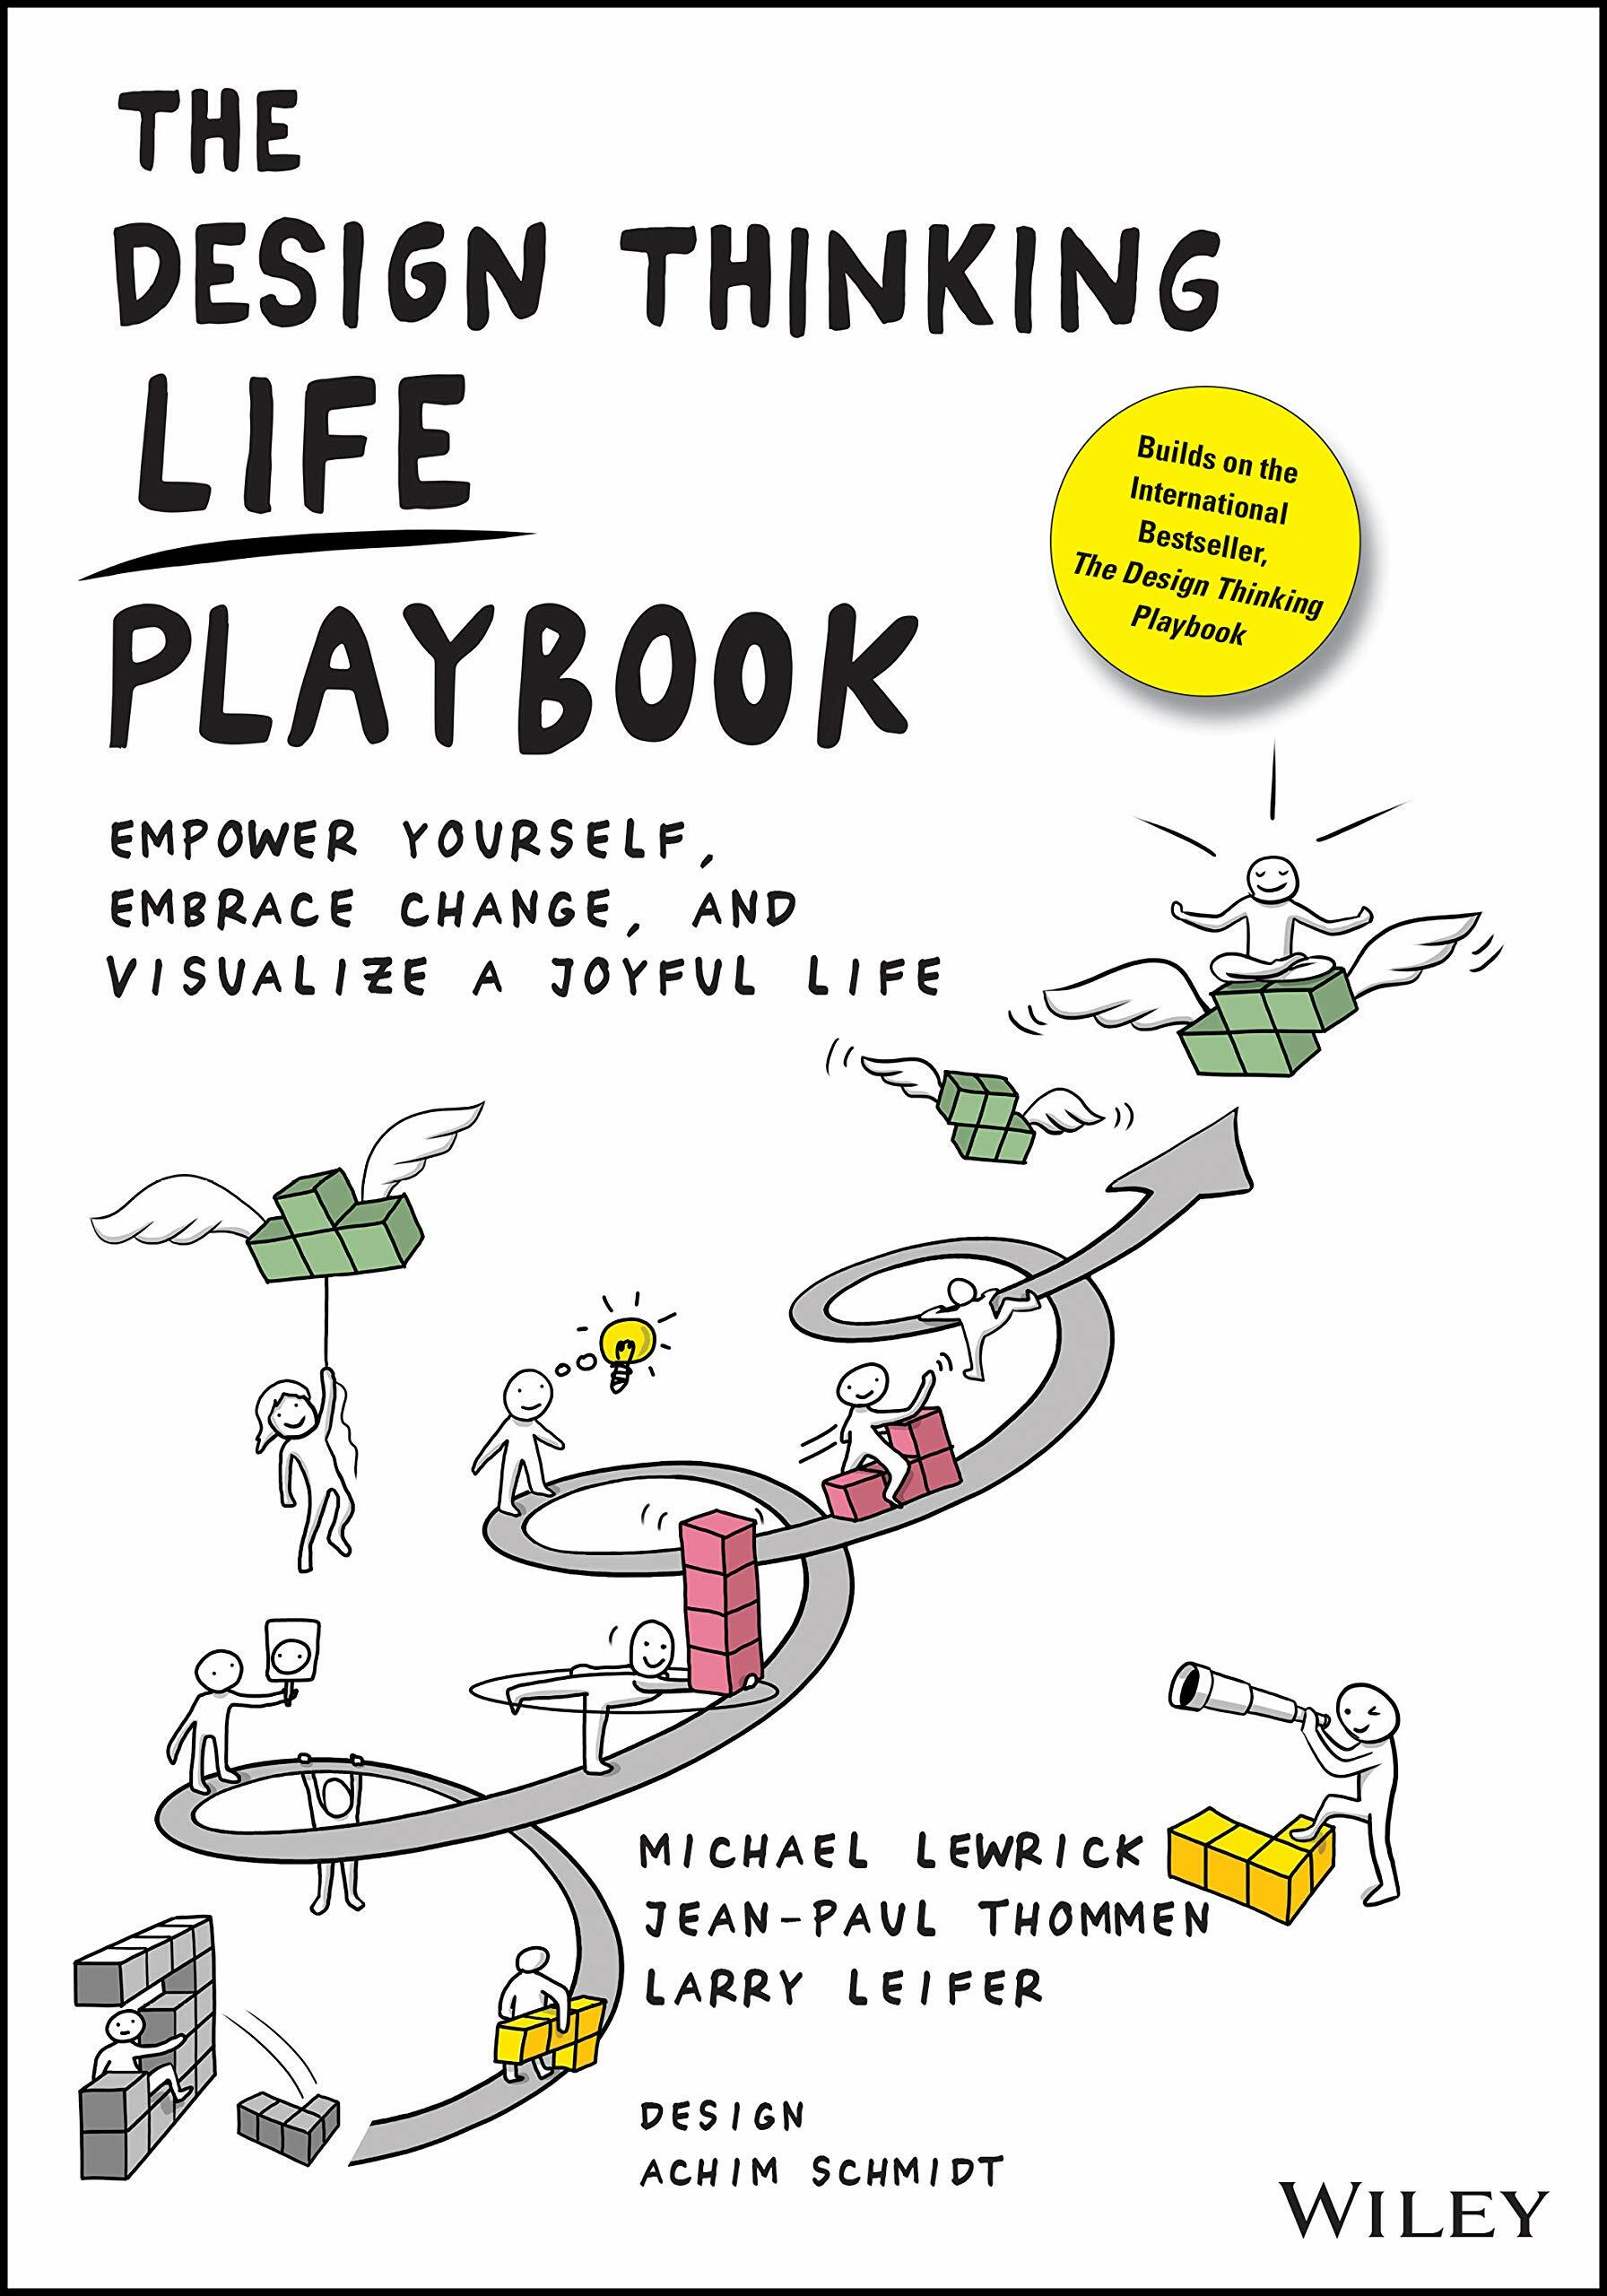 The Design Thinking Life Playbook: Empower Yourself, Embrace Change, and Visualize a Joyful Life (Paperback)